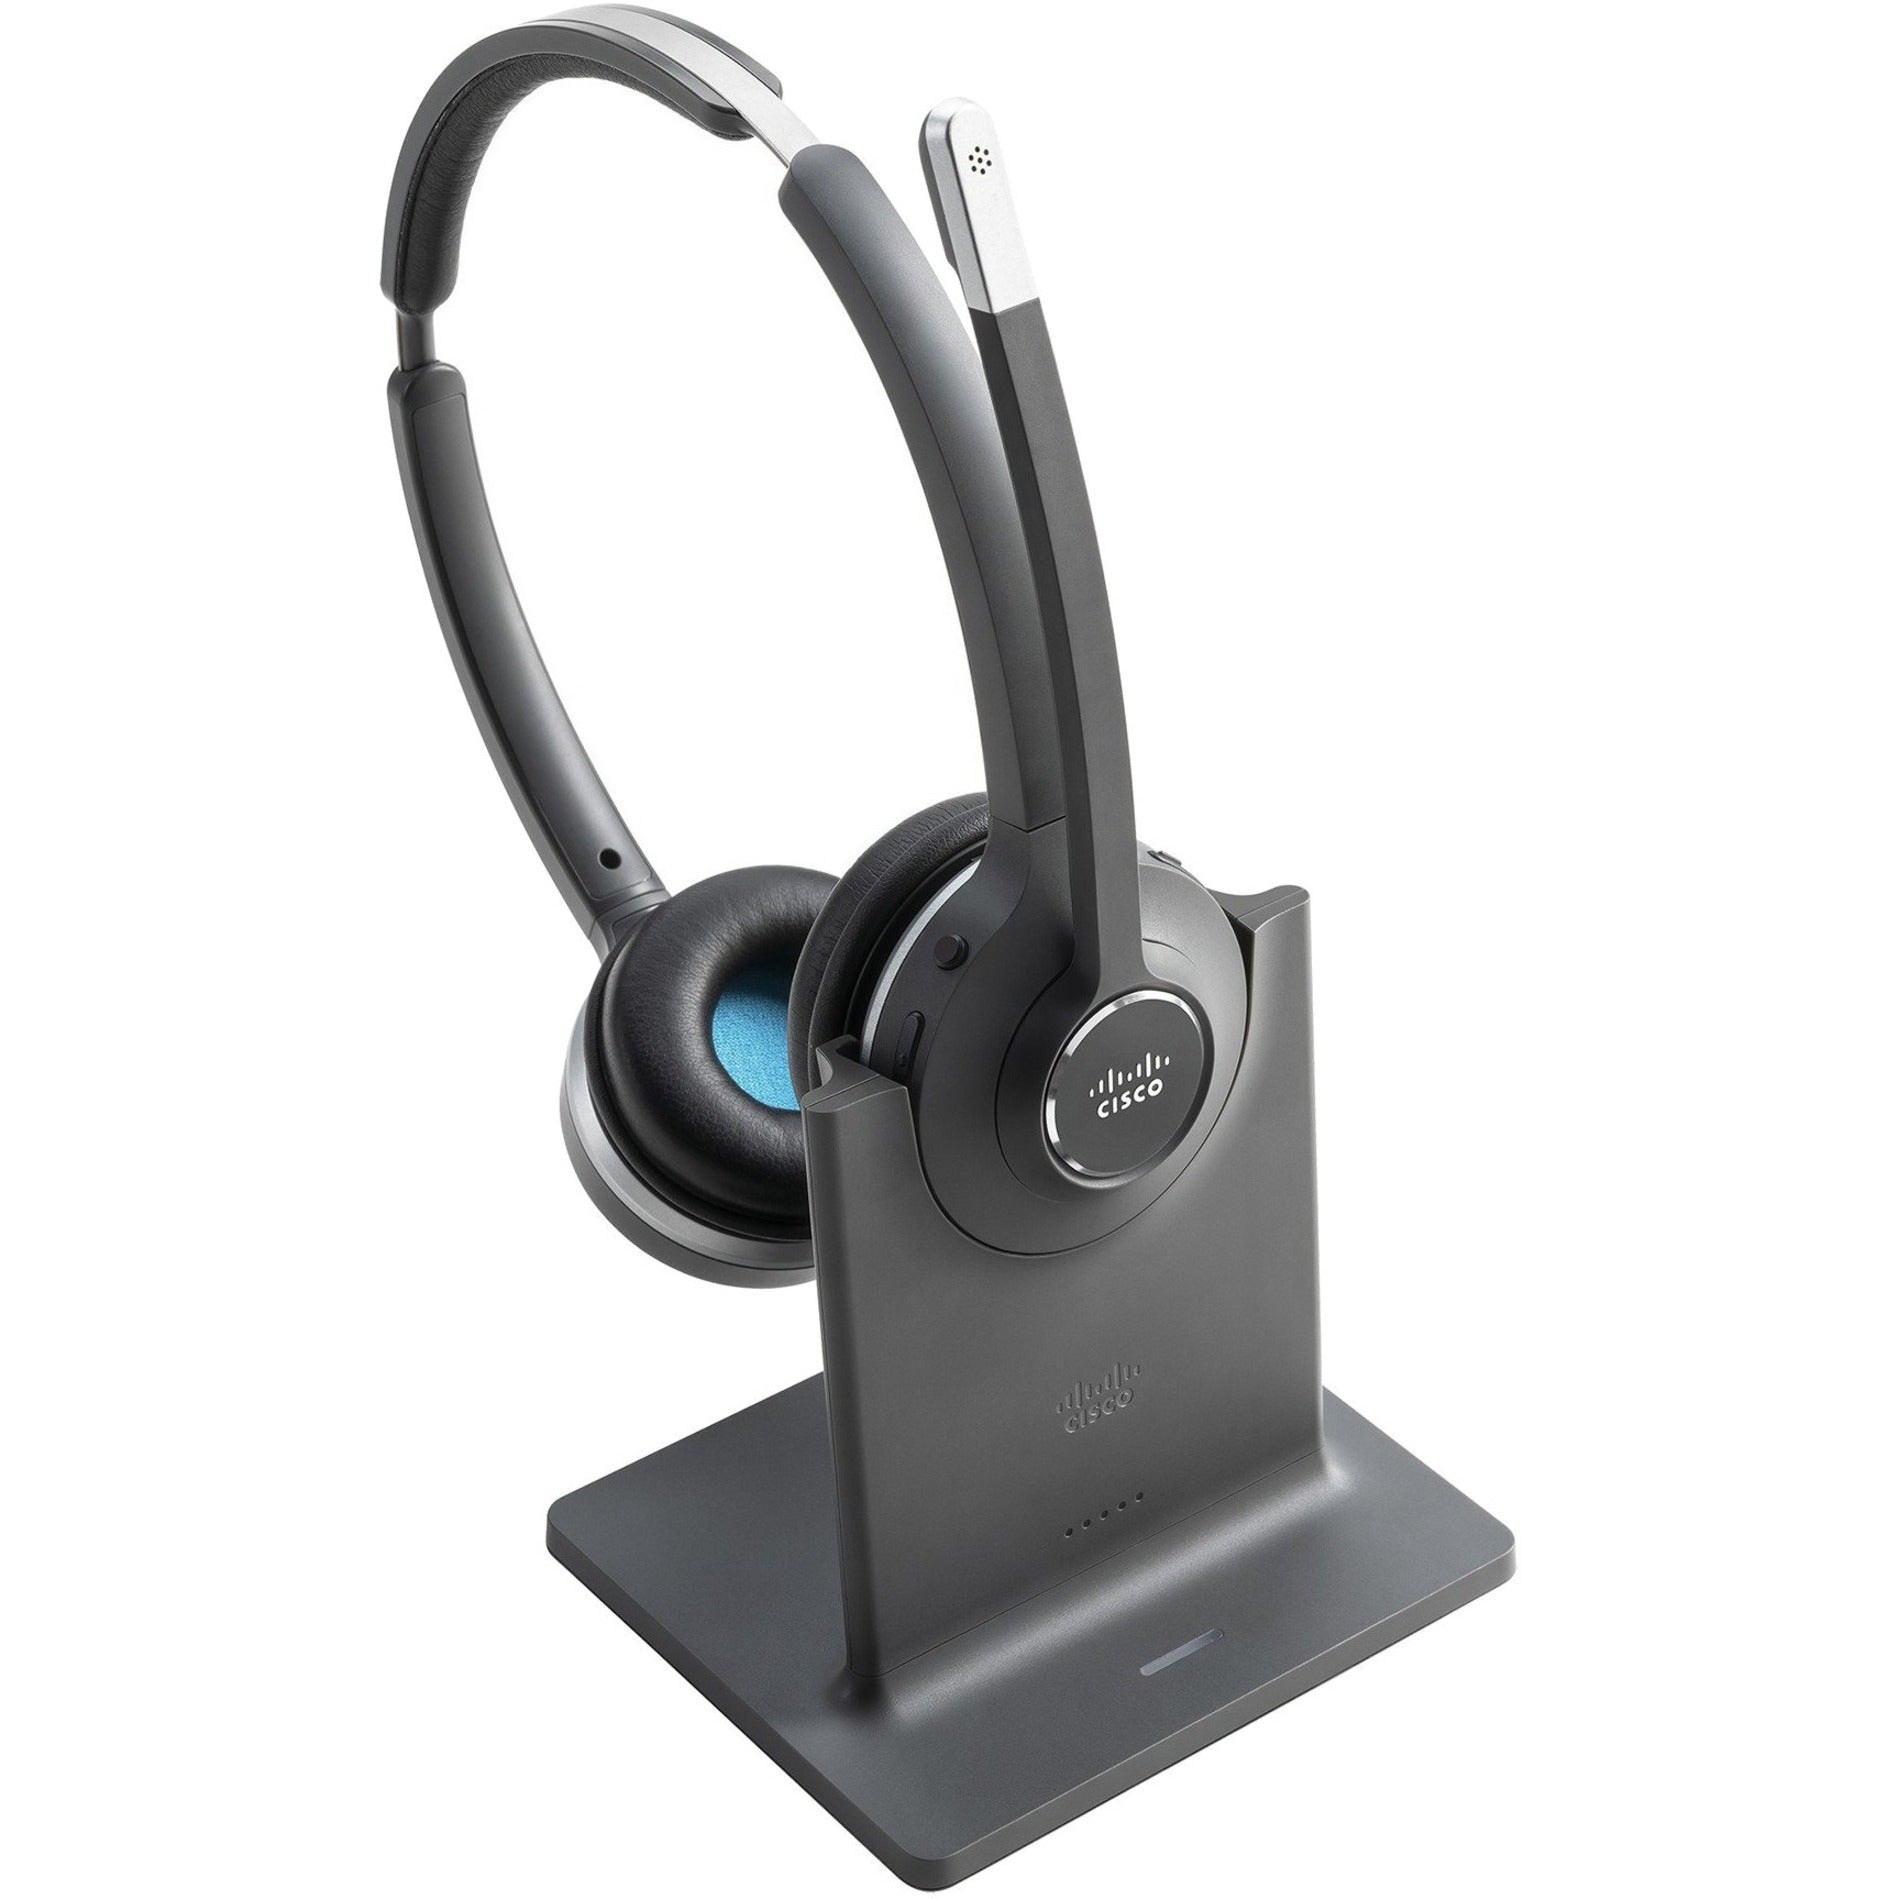 Cisco CP-HS-WL-562-M-US= 562 Headset, Wireless Bluetooth Stereo Over-the-head Headset